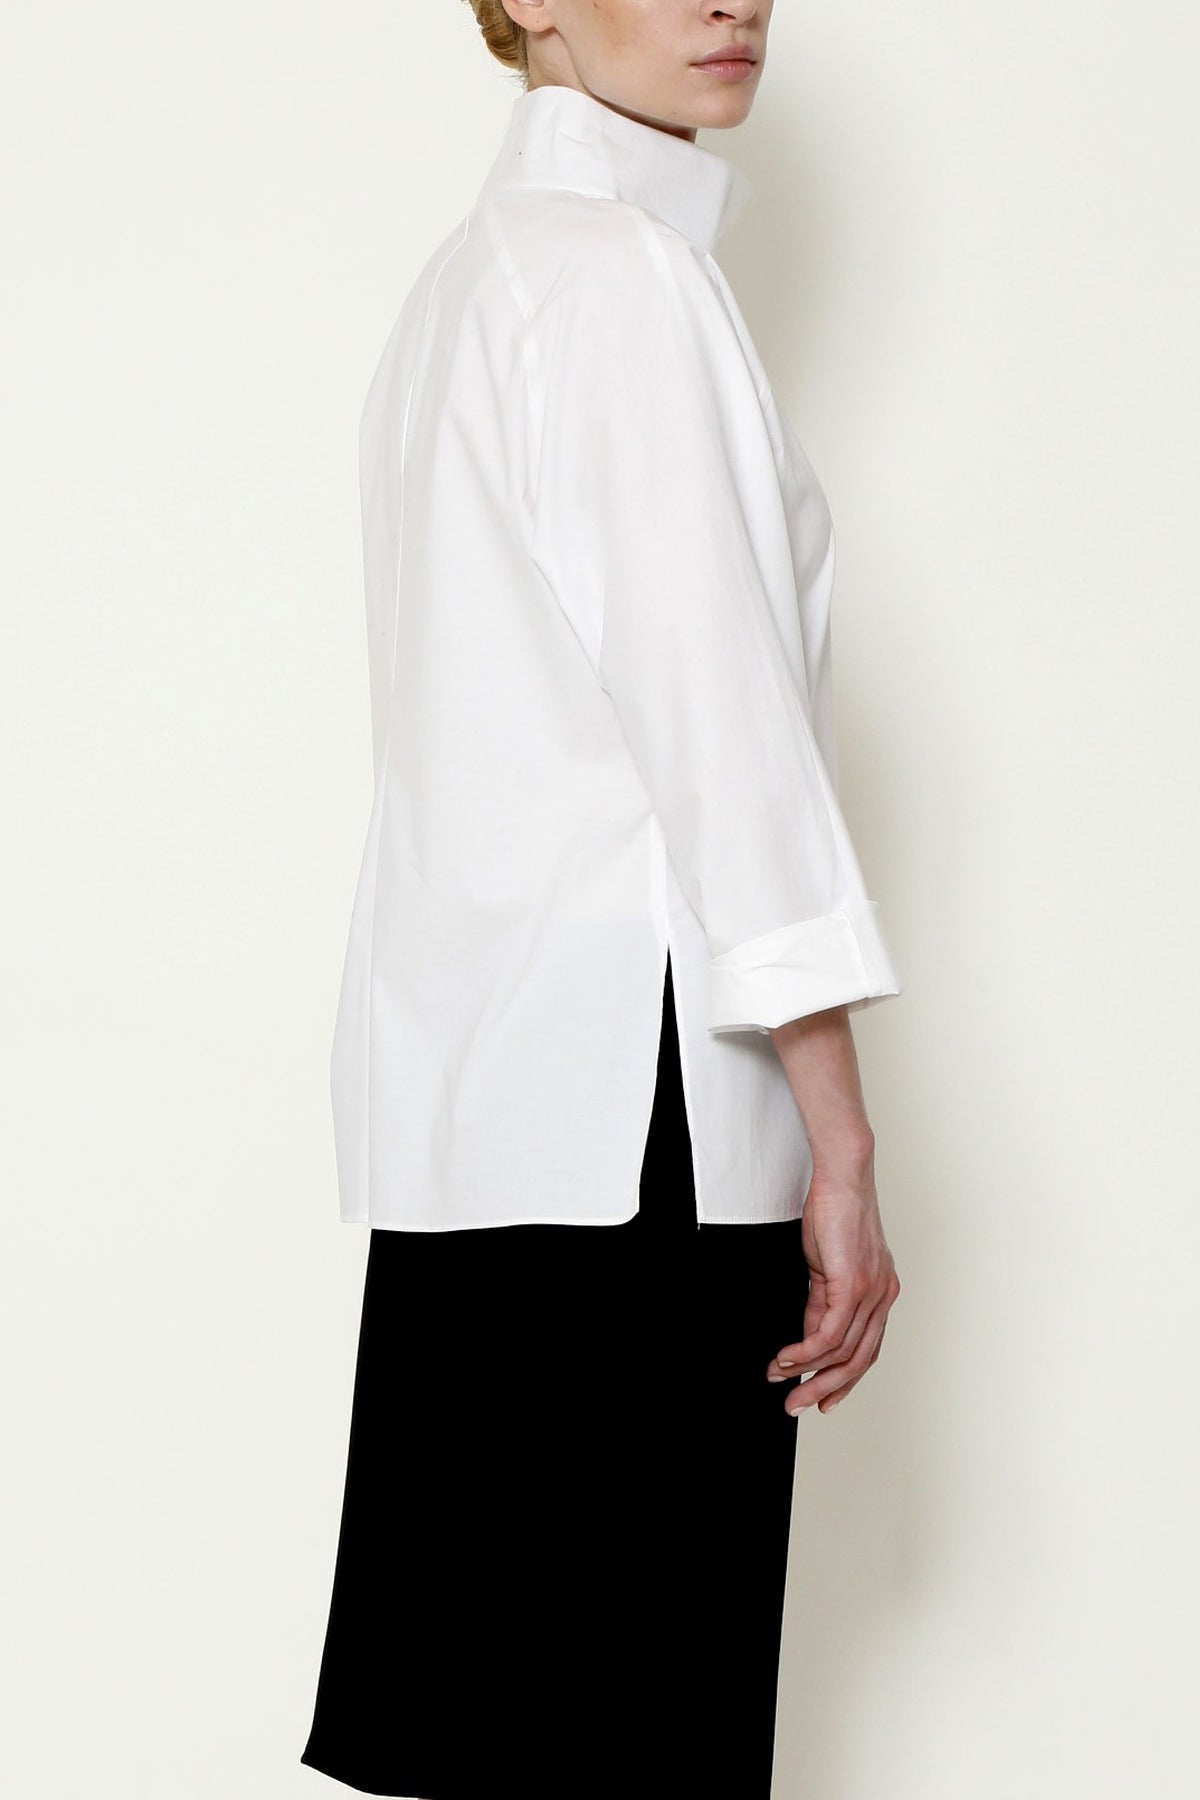 The Zoom Blouse in Paper Cotton with Raglan Sleeves and a High Collar - 6